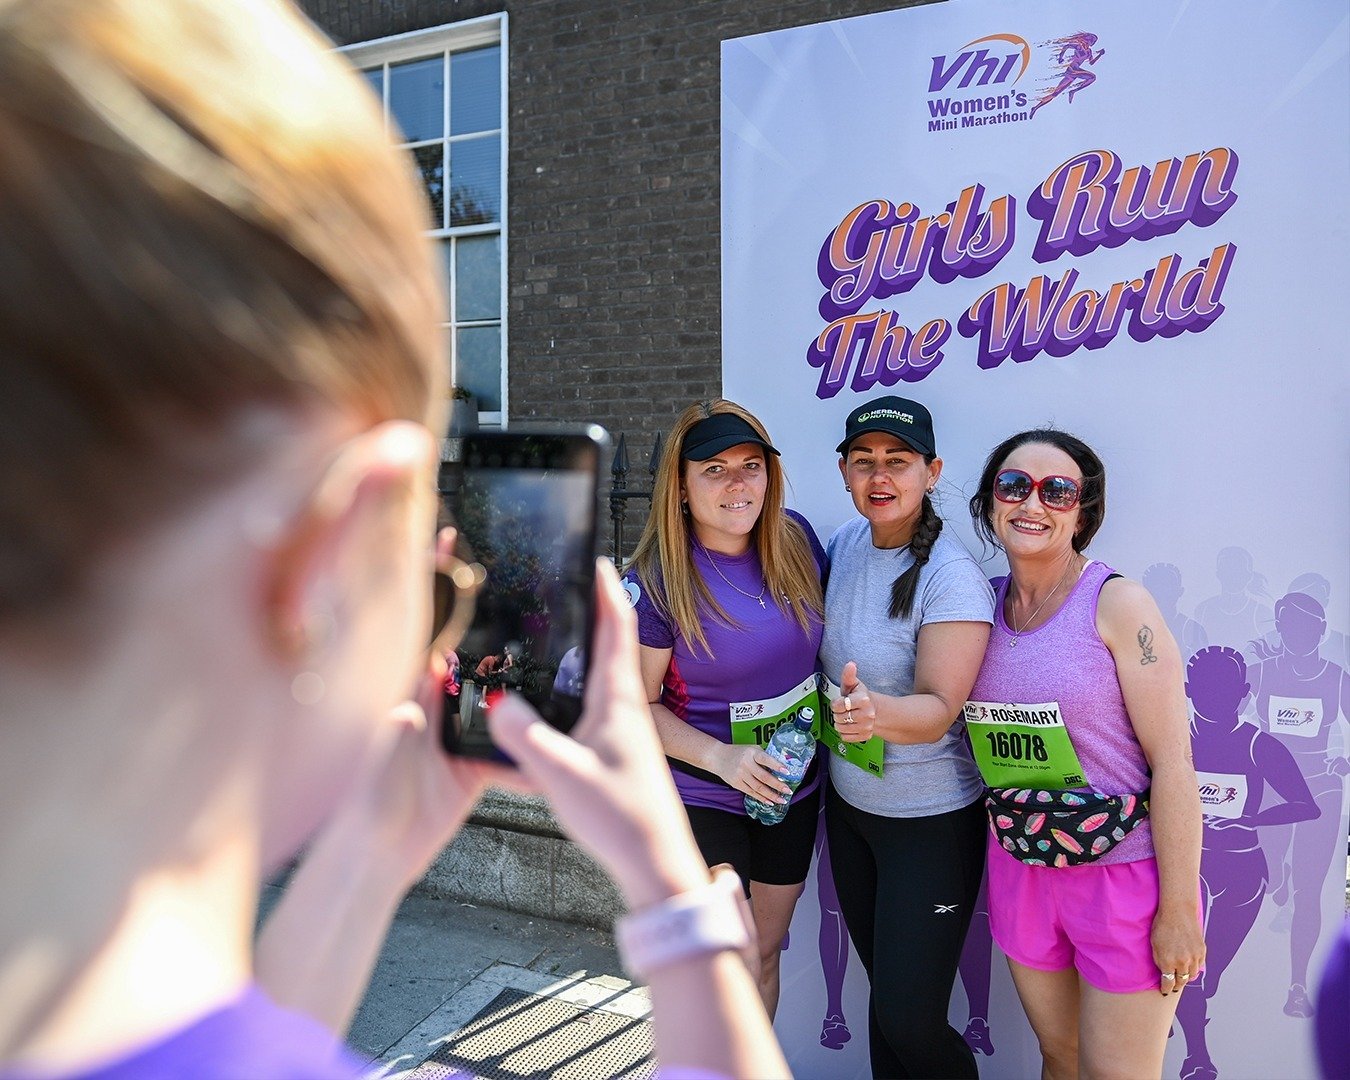 The year's theme is all about heart, we all have those special people in our lives who are close to our hearts, and this can grow when you have the opportunity to train together for Vhi Women's Mini Marathon. 

Tag your training buddy in the comments